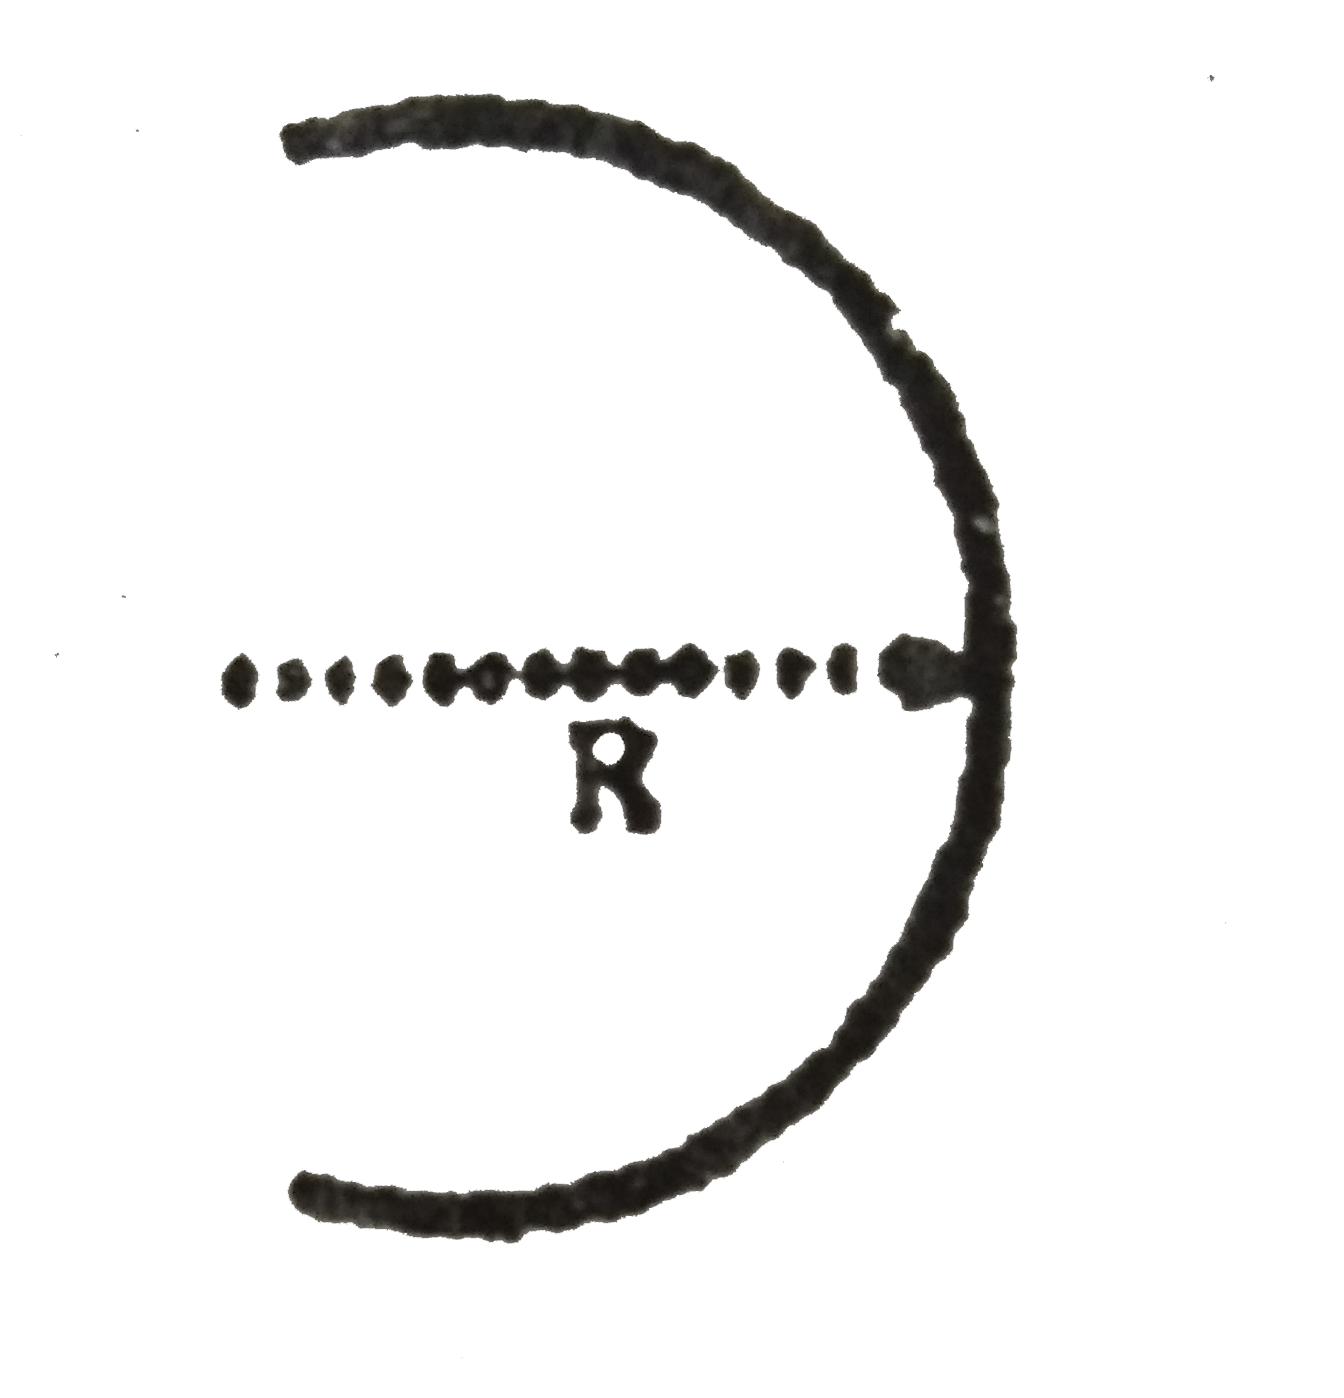 A half ring of mass m, radius R is hanged at its one end its one end in verical plane and if free to socilalte in its plane.   Find oscillations frequency of the half ring.